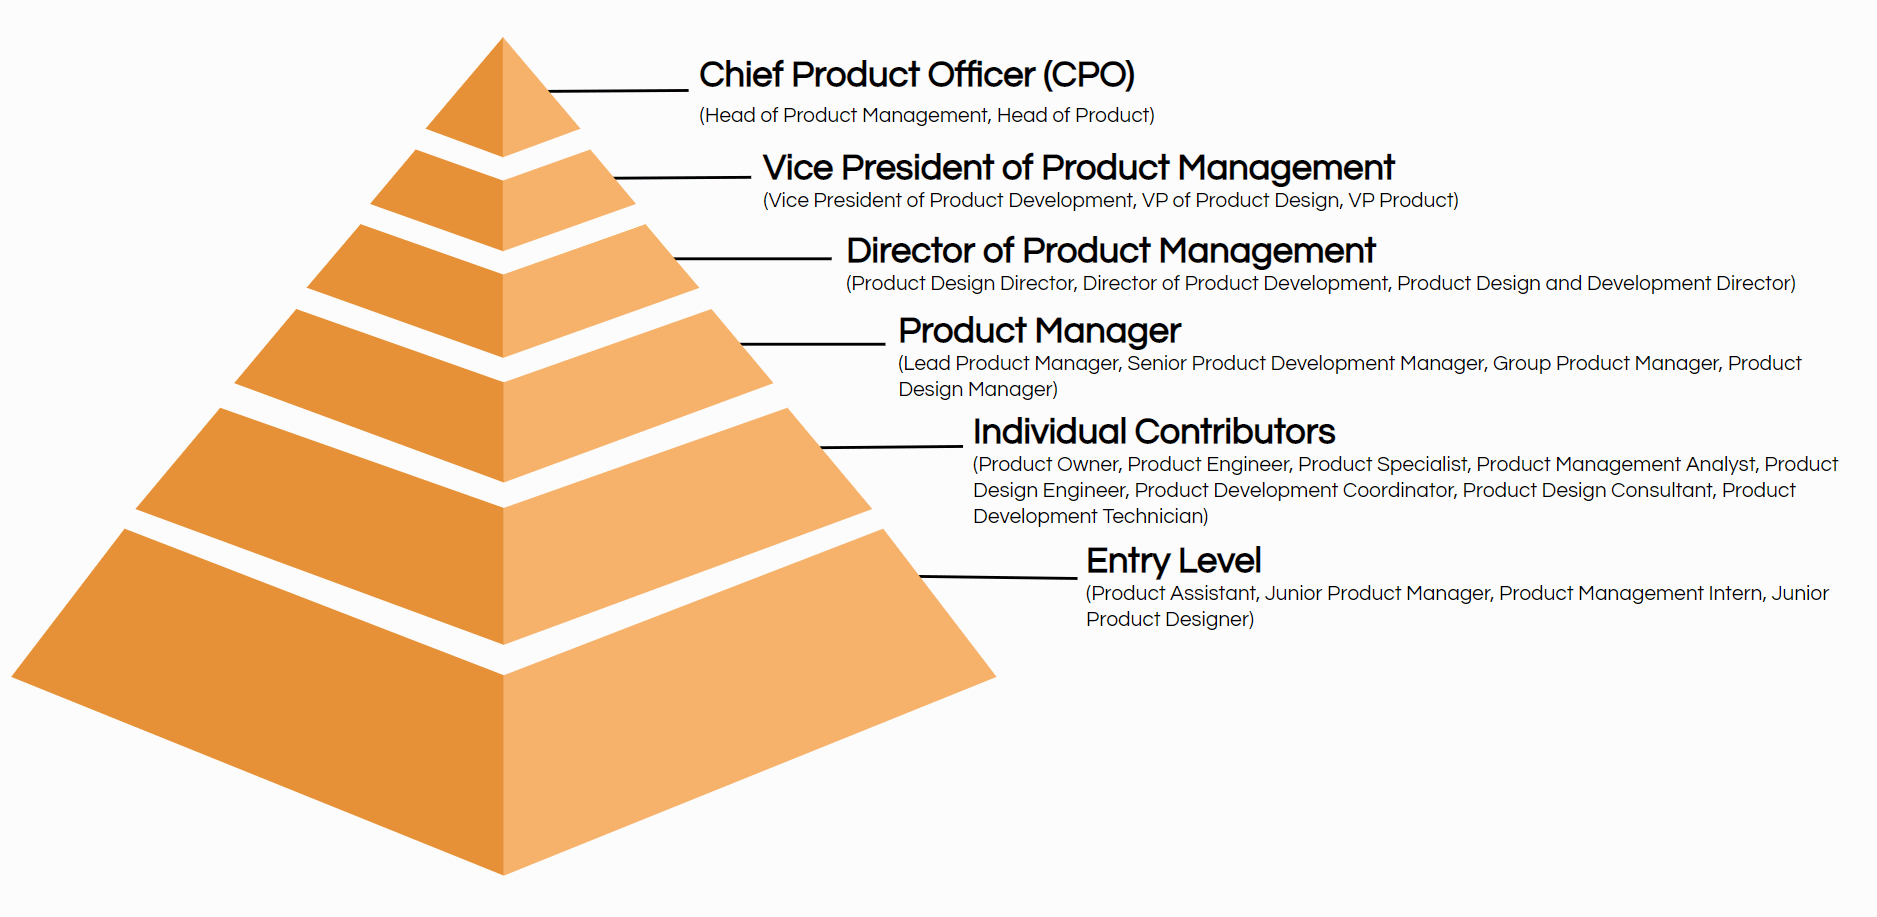 Chief Product Officer